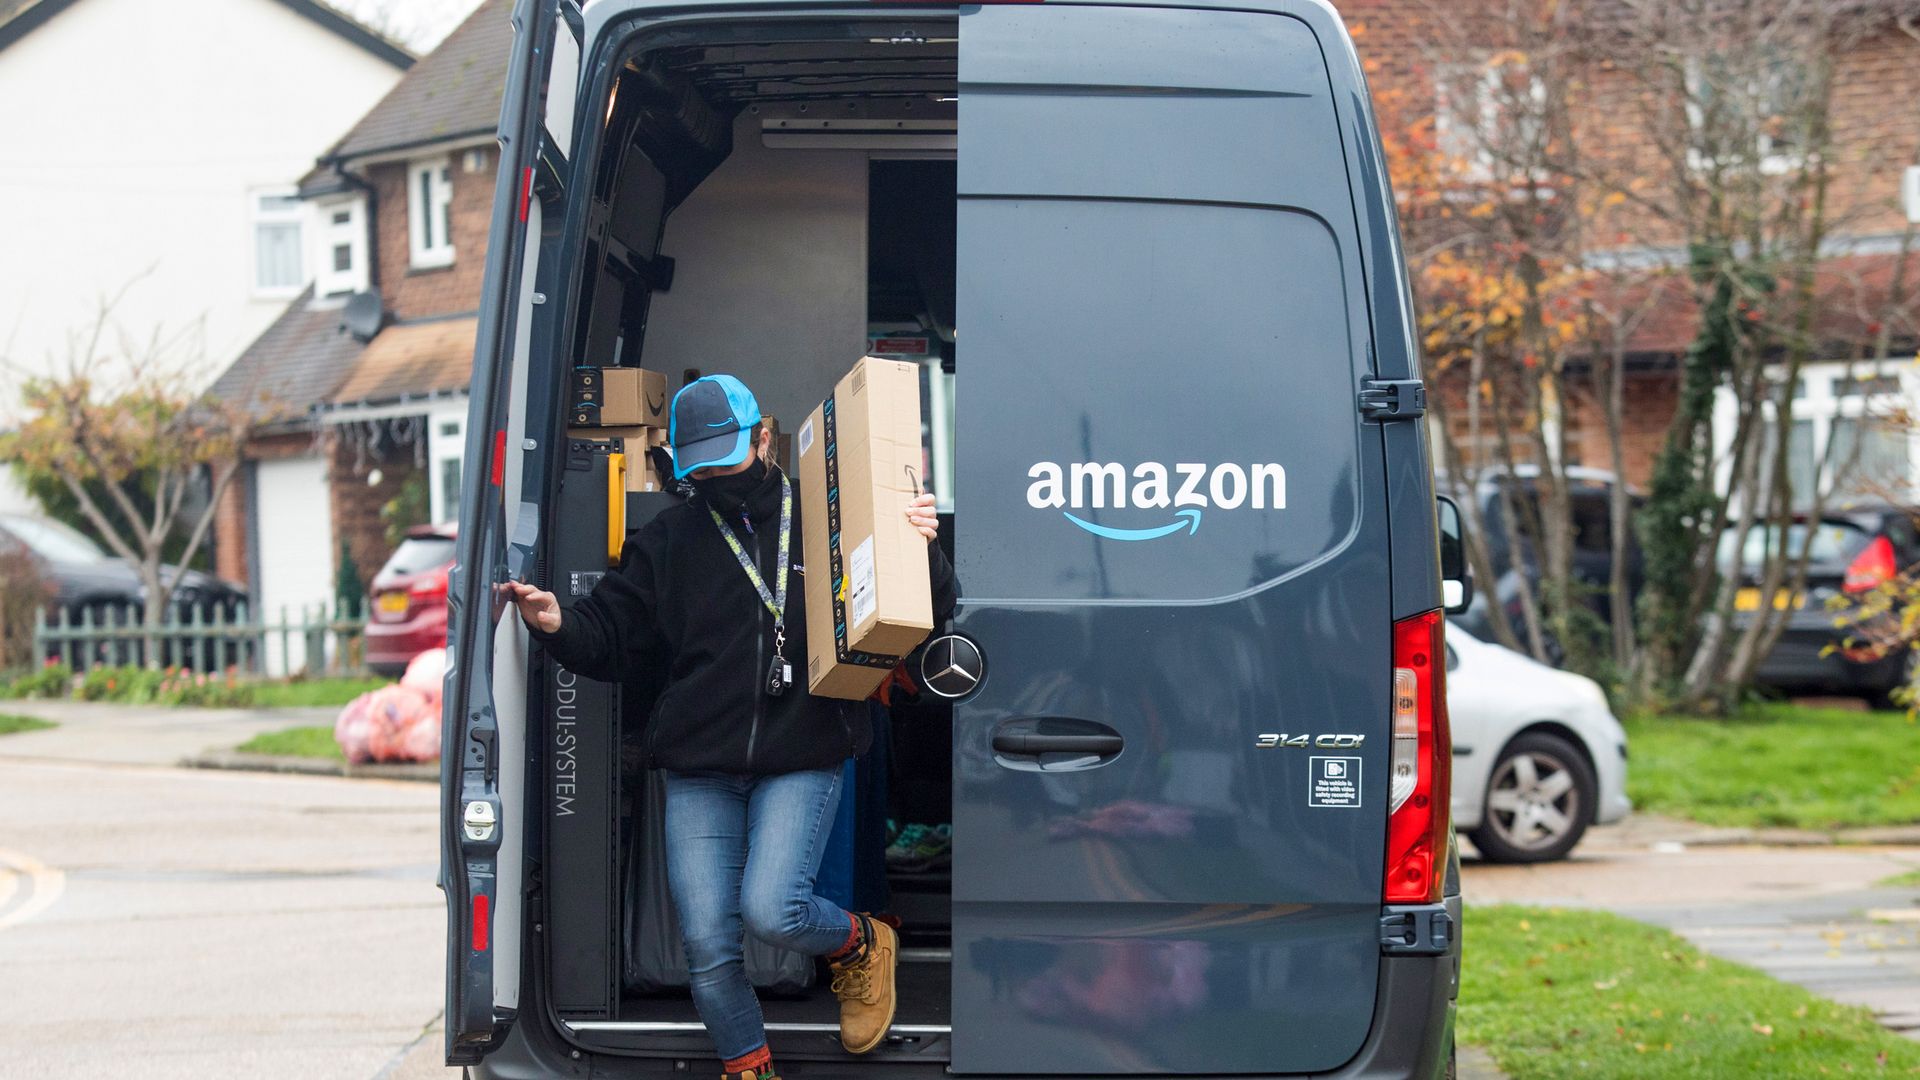 Picture of Amazon employee getting off an Amazon ban carrying a package